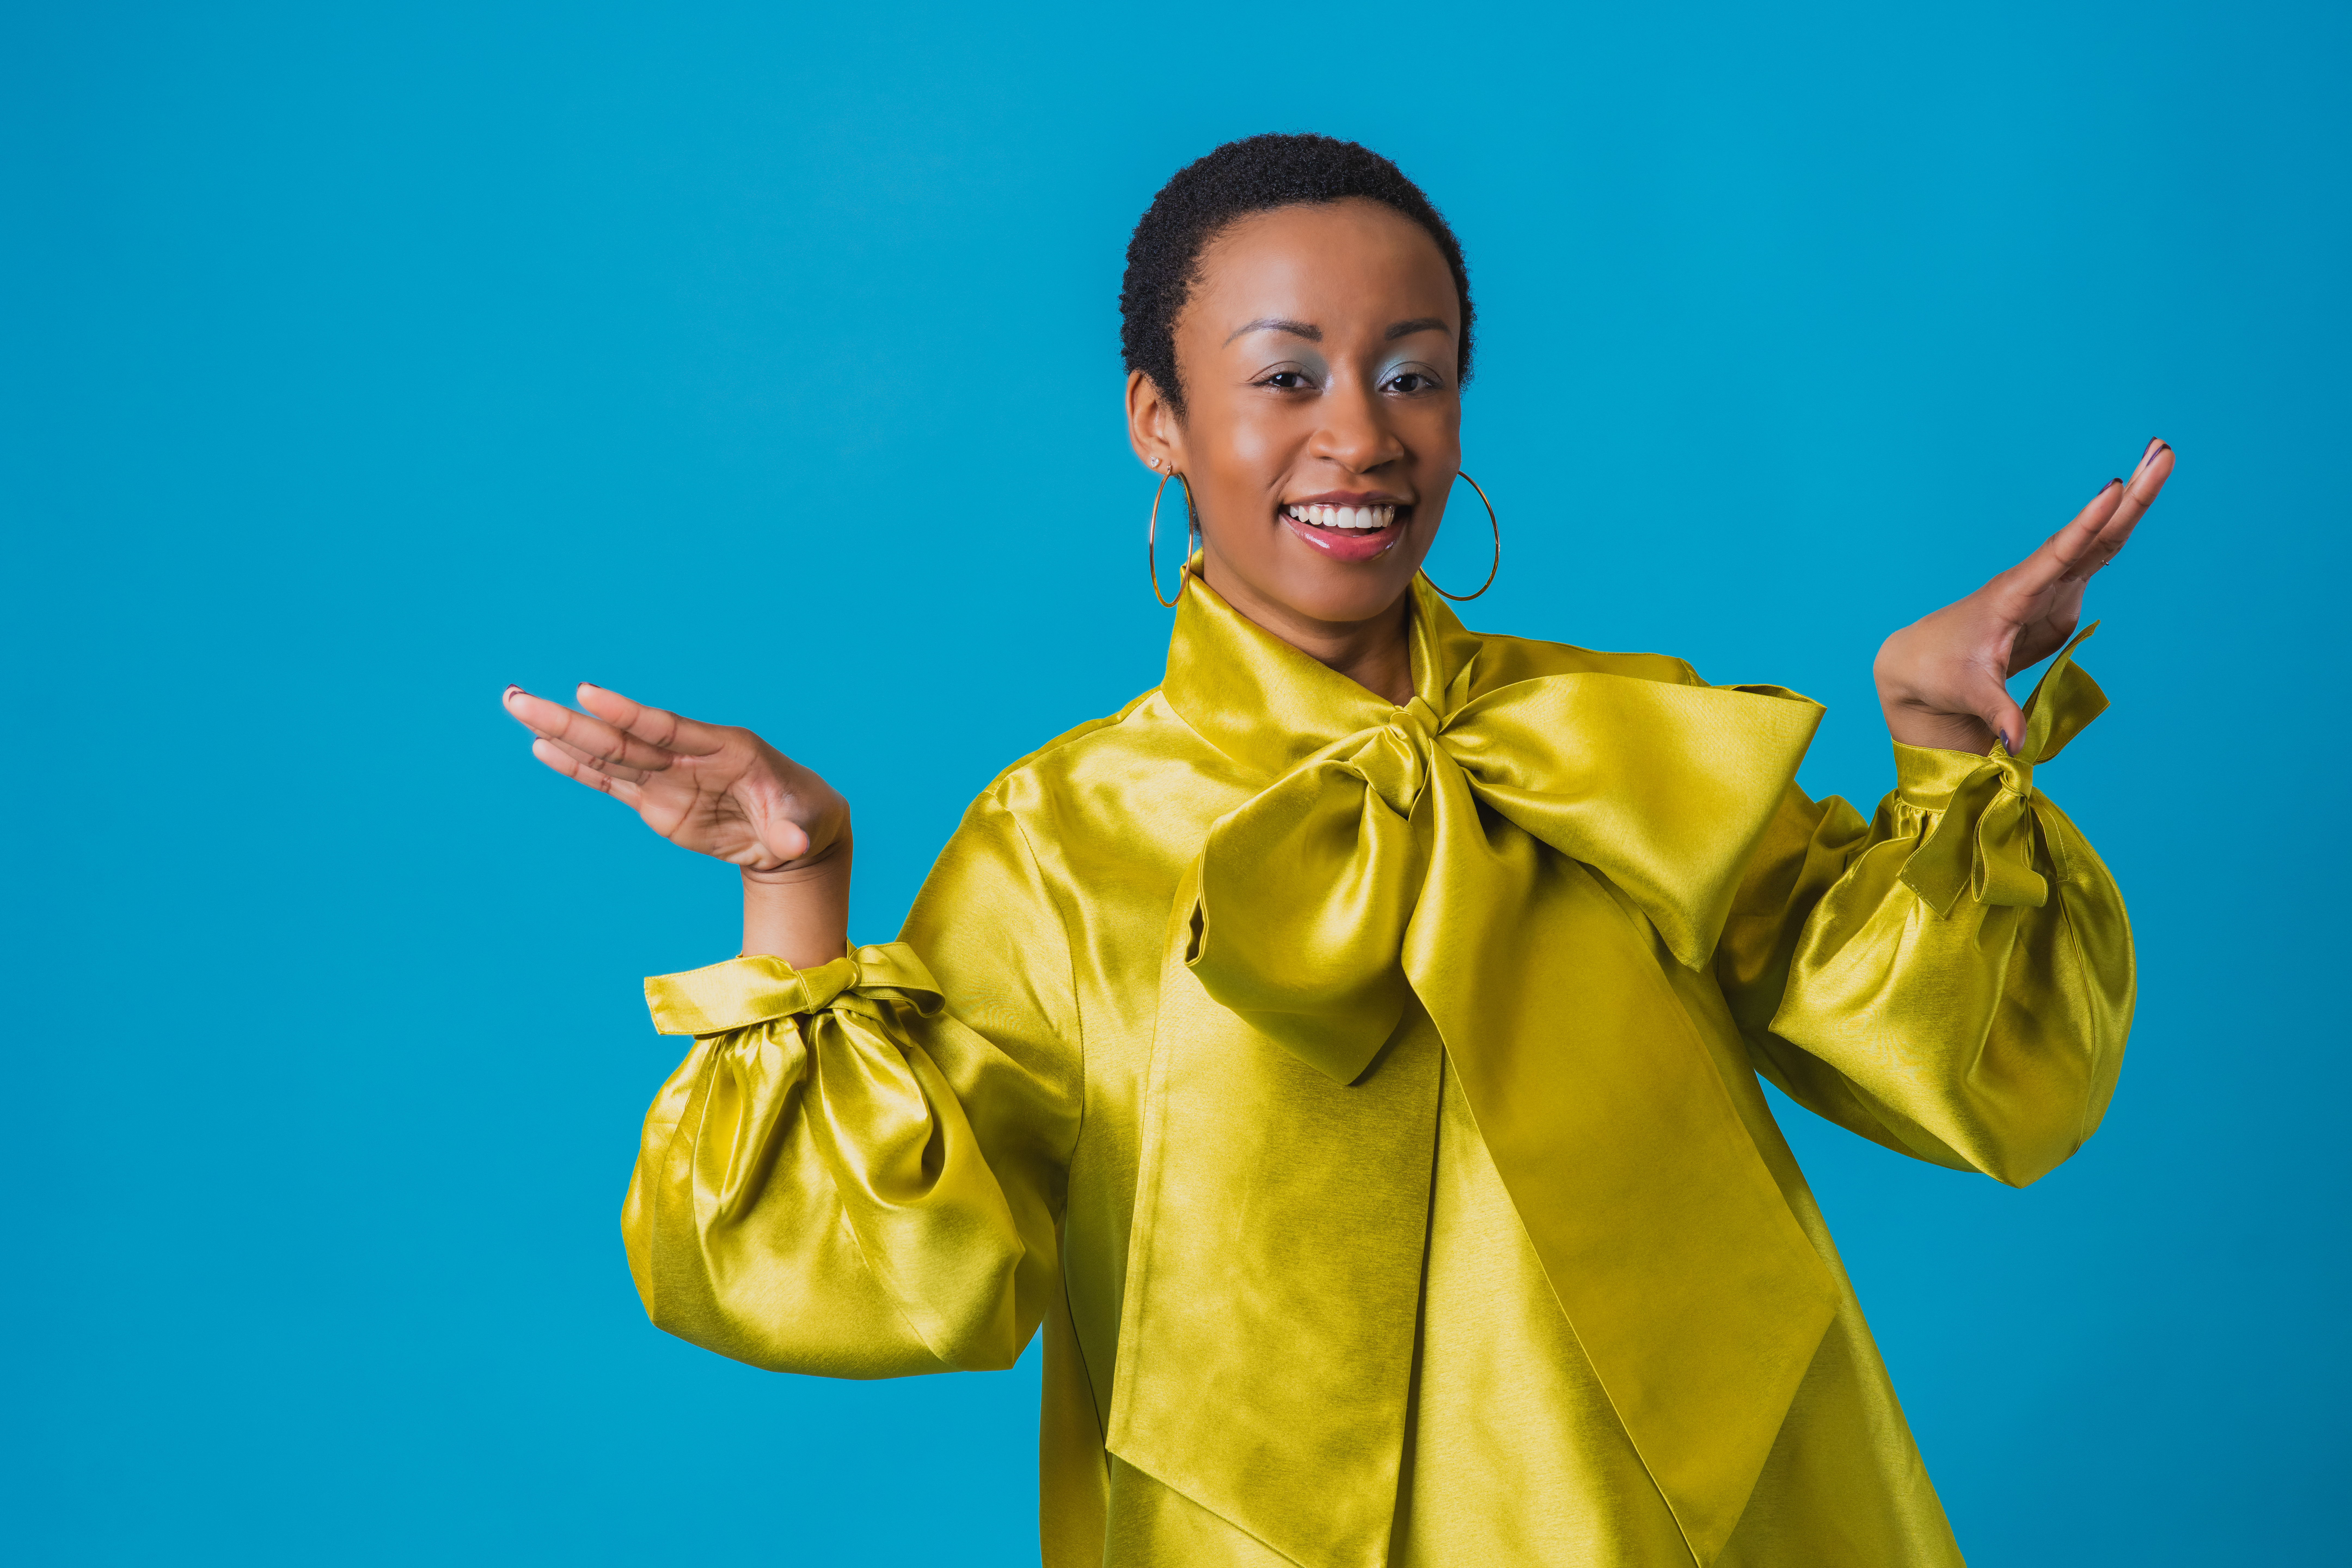 Wearing a yellow shirt, Damoyee poses in front of a blue backdrop